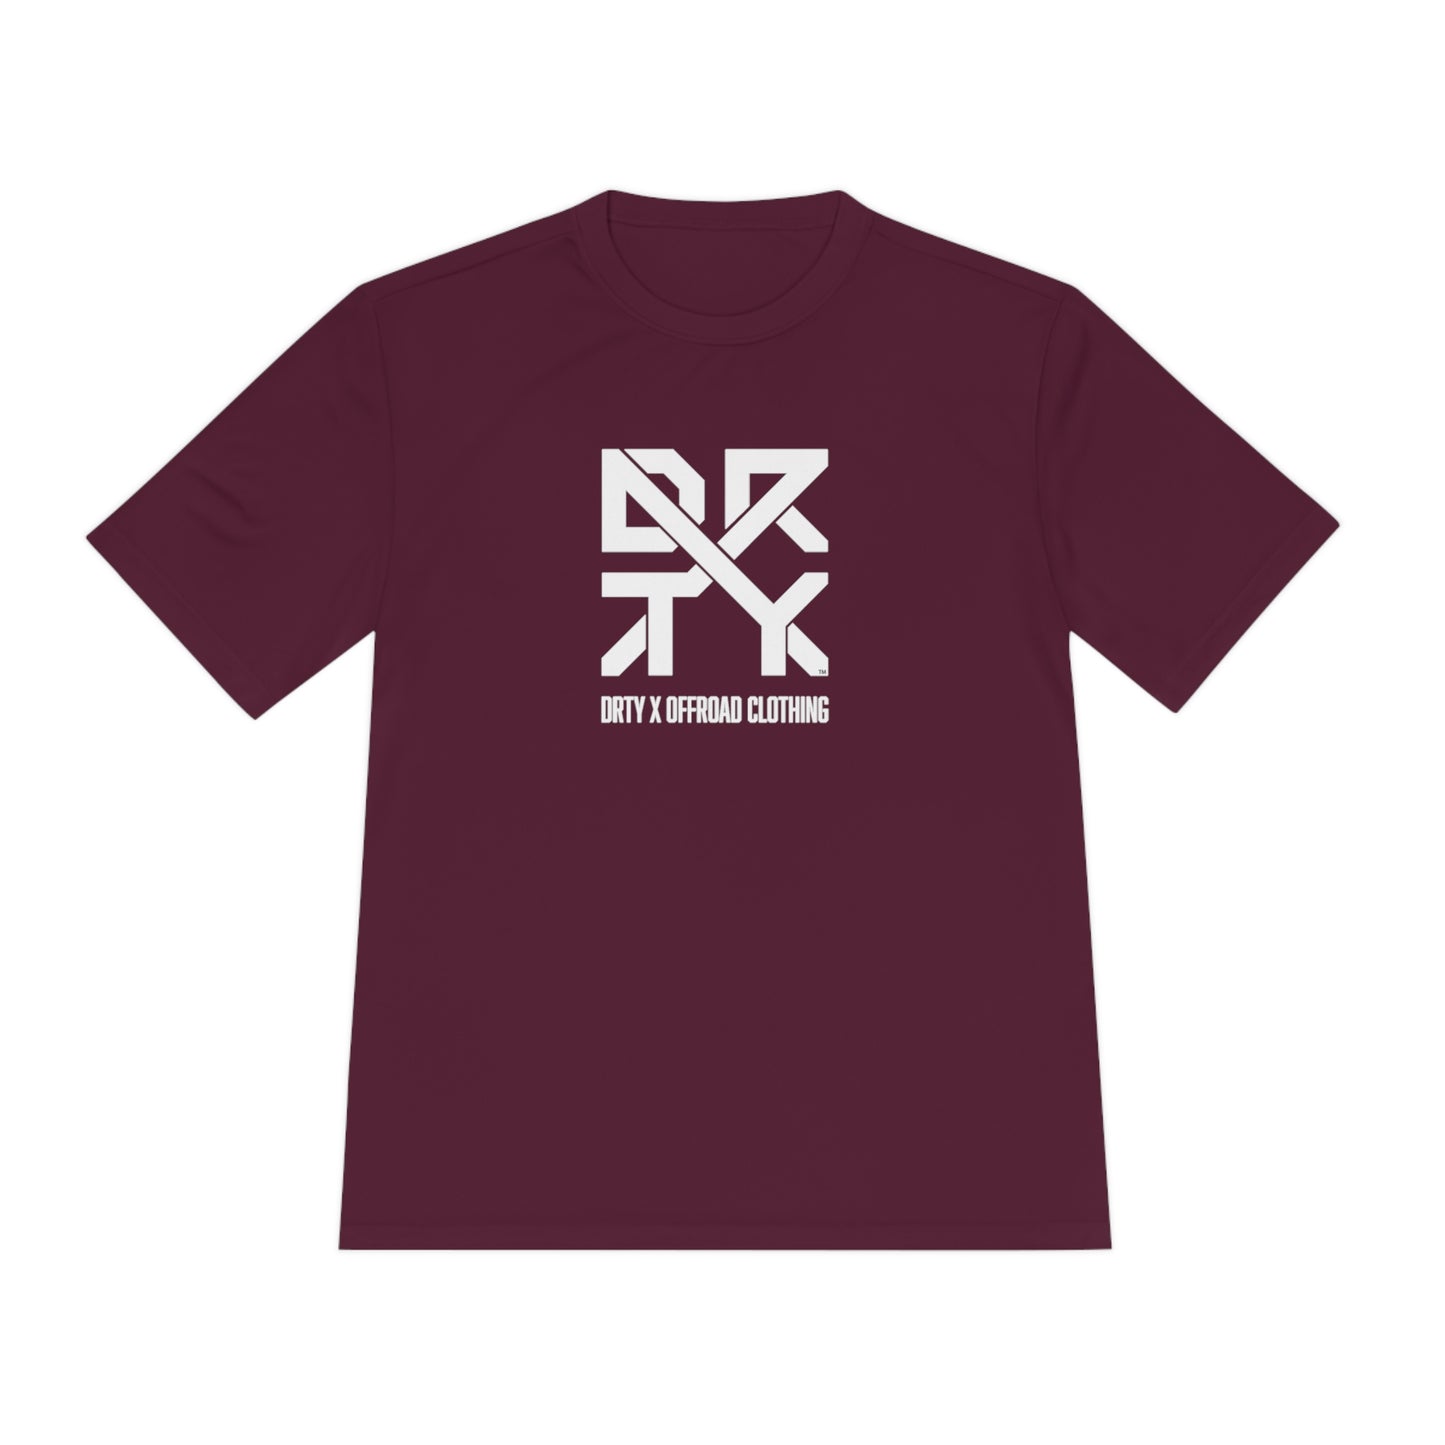 This image showcases the front view of a T-shirt with a large DRTY X Logo on the center of the shirt.